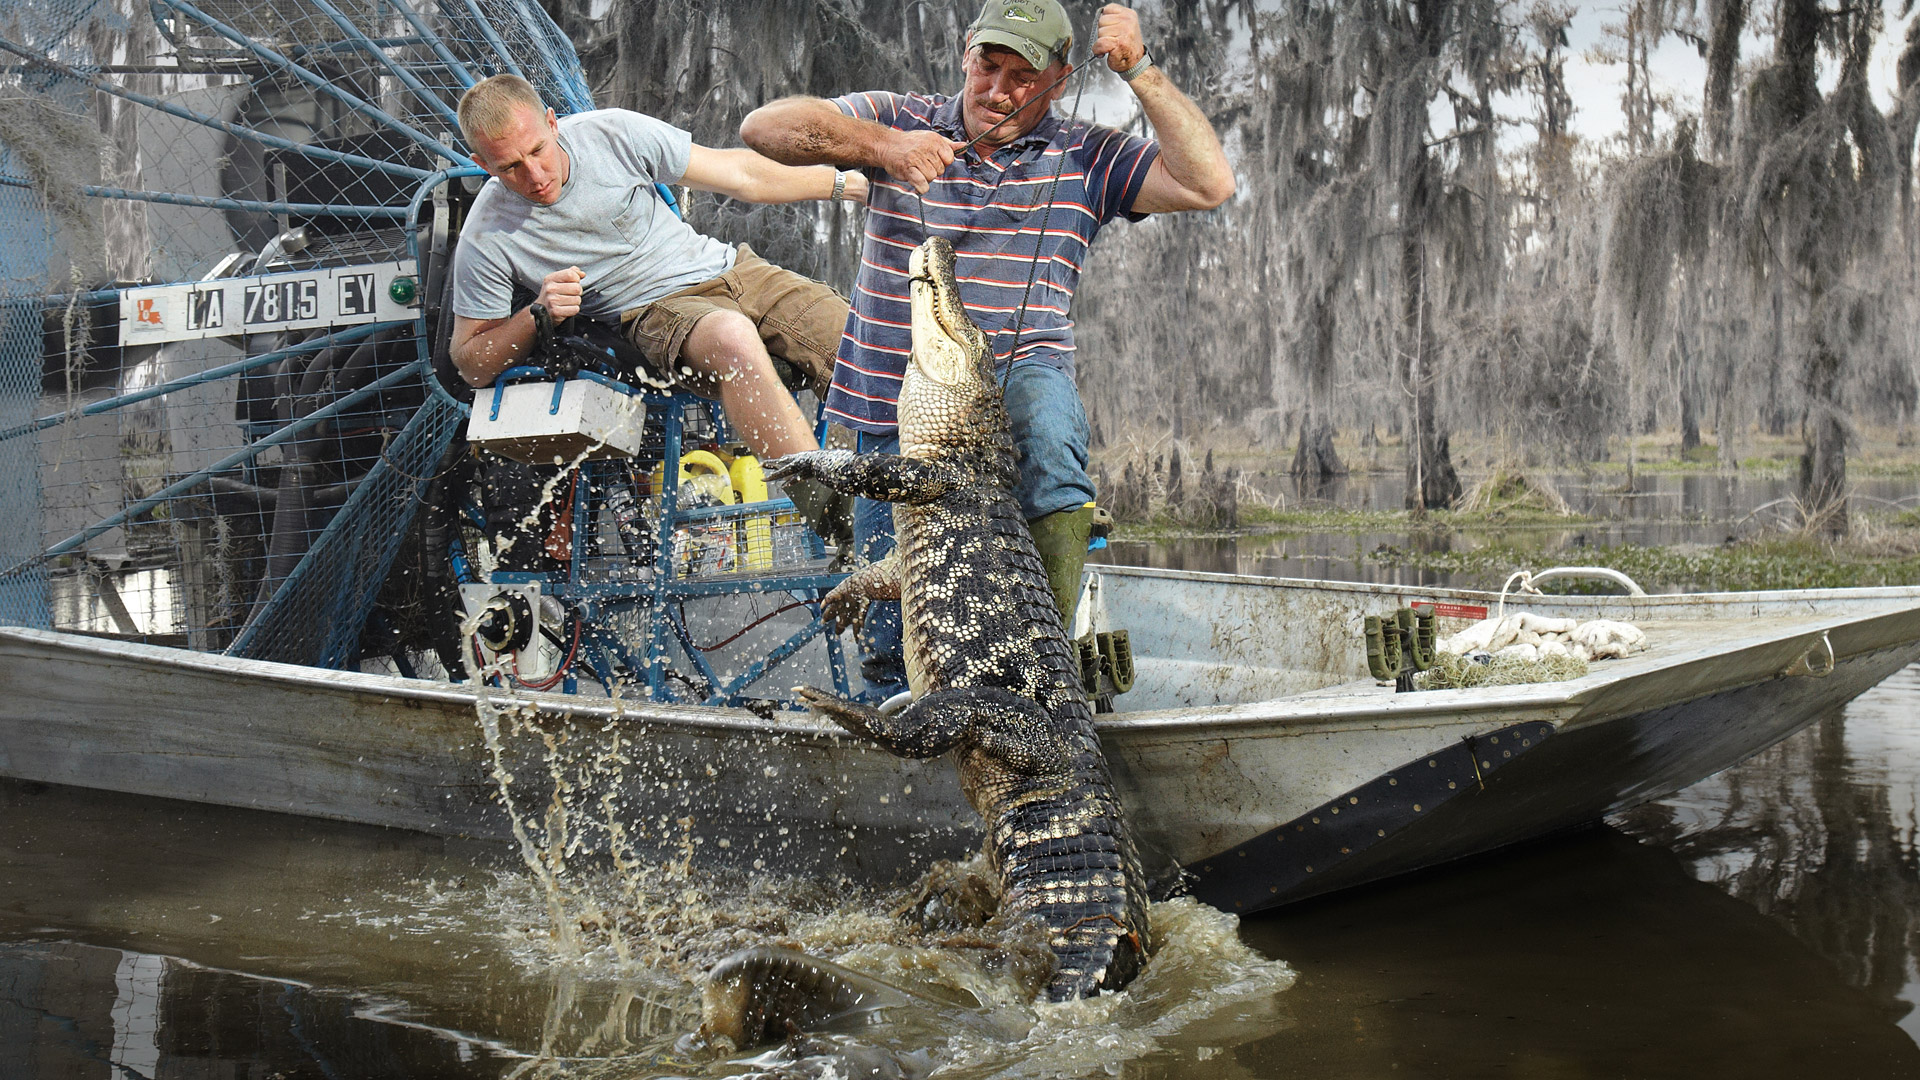 Catch up on season 5 of Swamp People, only on The HISTORY Channel. 